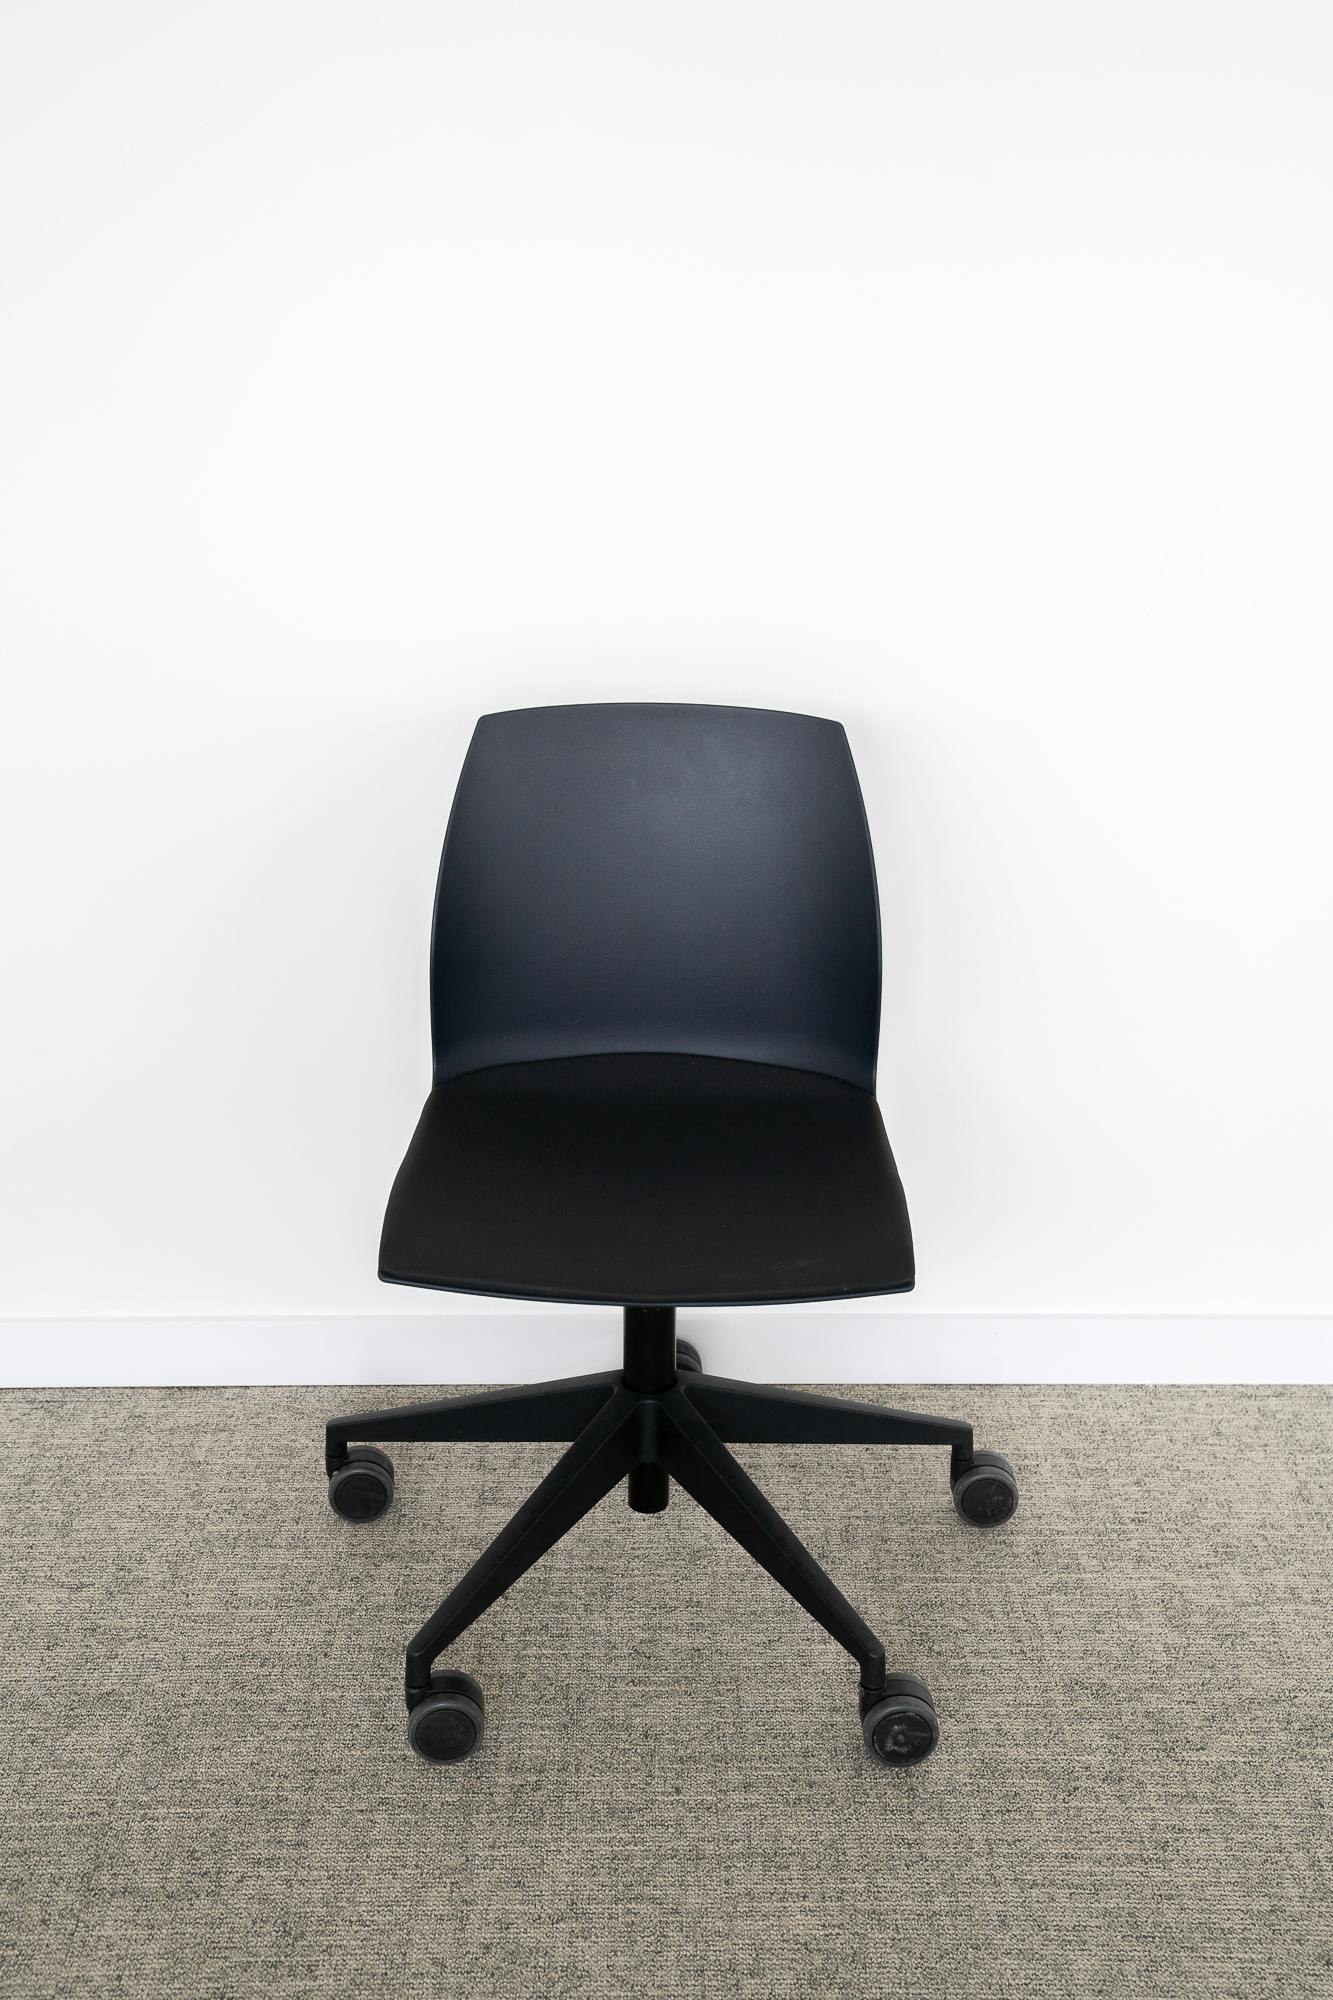 Black office chair KASTEL - Second hand quality "Office chairs" - Relieve Furniture